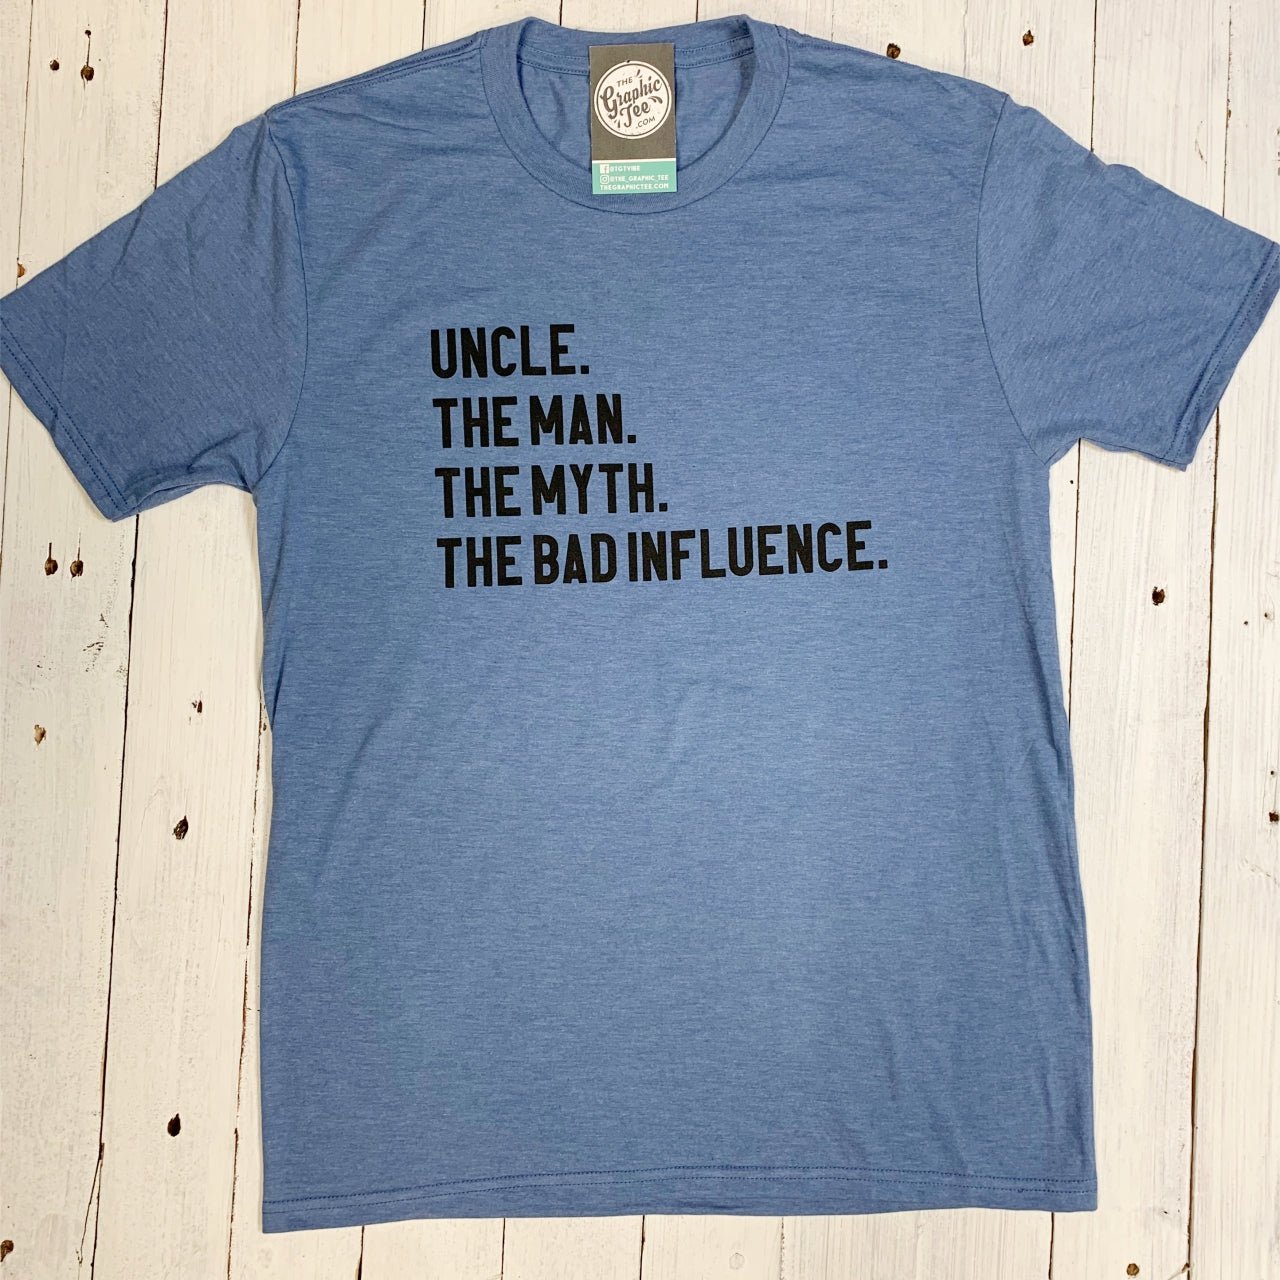 Uncle. The Man. The Myth. The Bad Influence. - The Graphic Tee